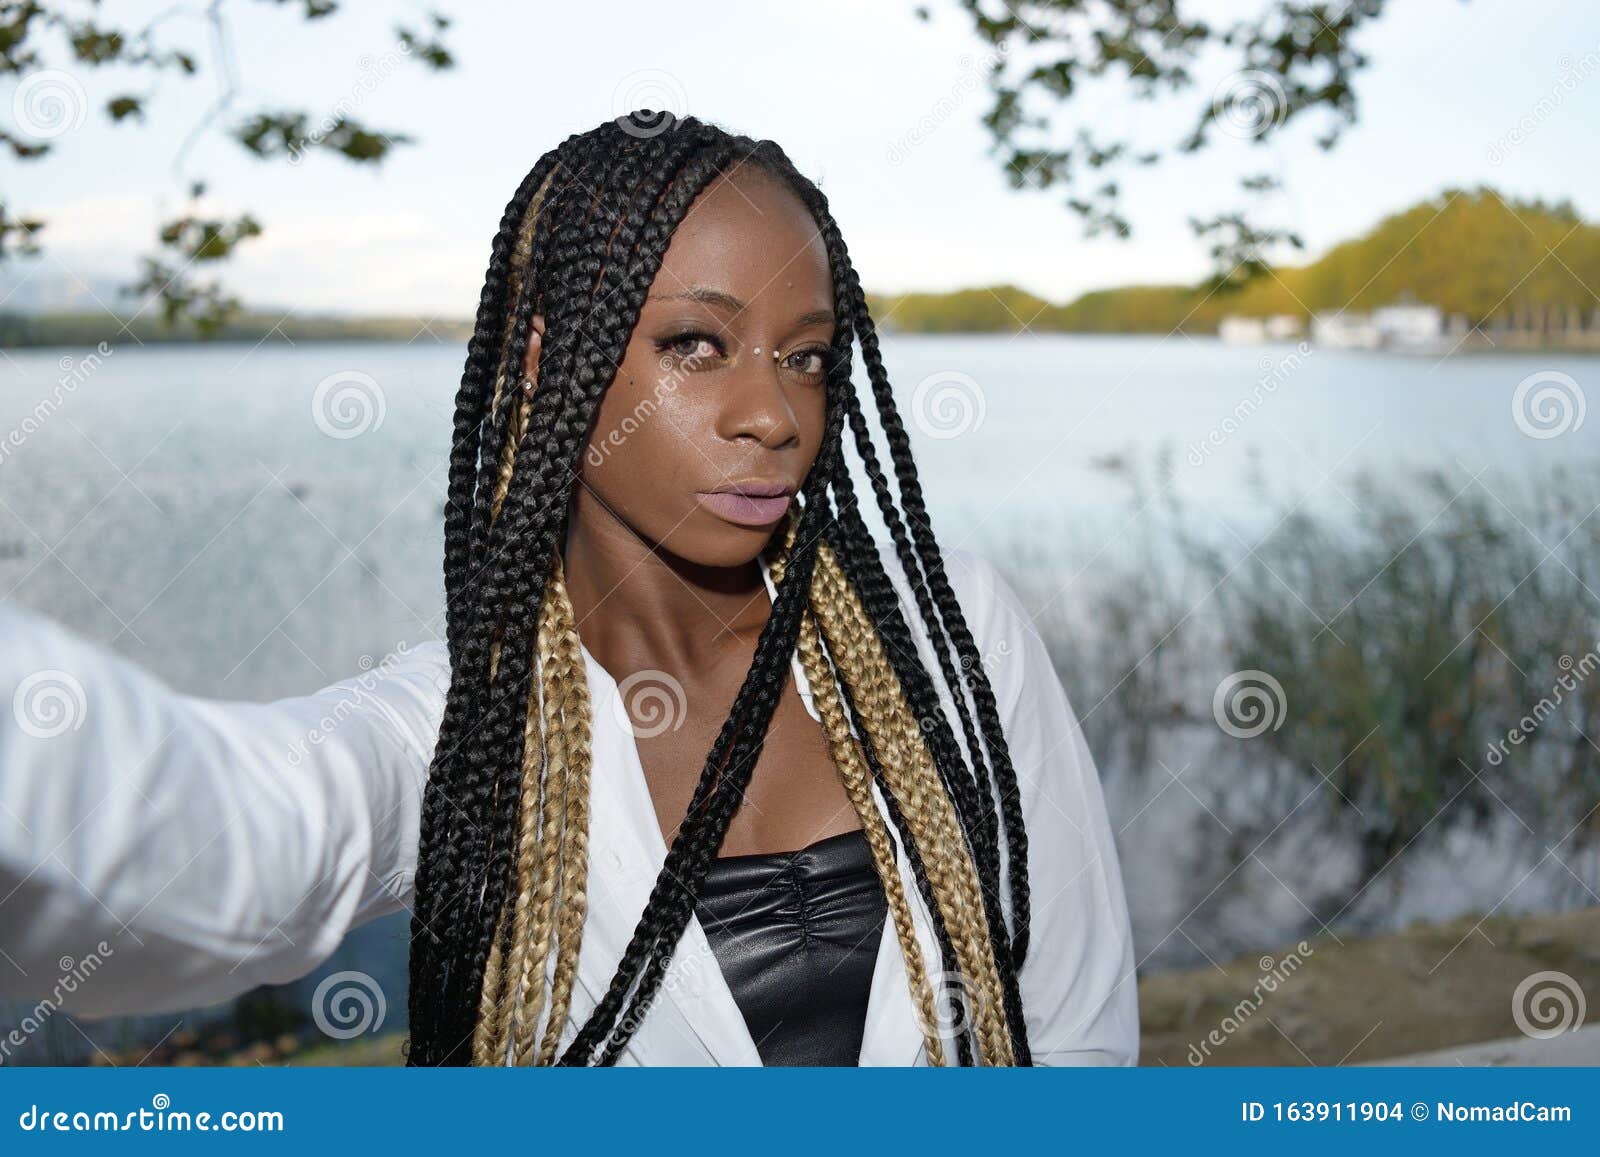 Afro Black Girl Takes A Selfie With Long Black And Blonde Braids With A Lake In The Background Stock Photo Image Of Authentic Lady 163911904